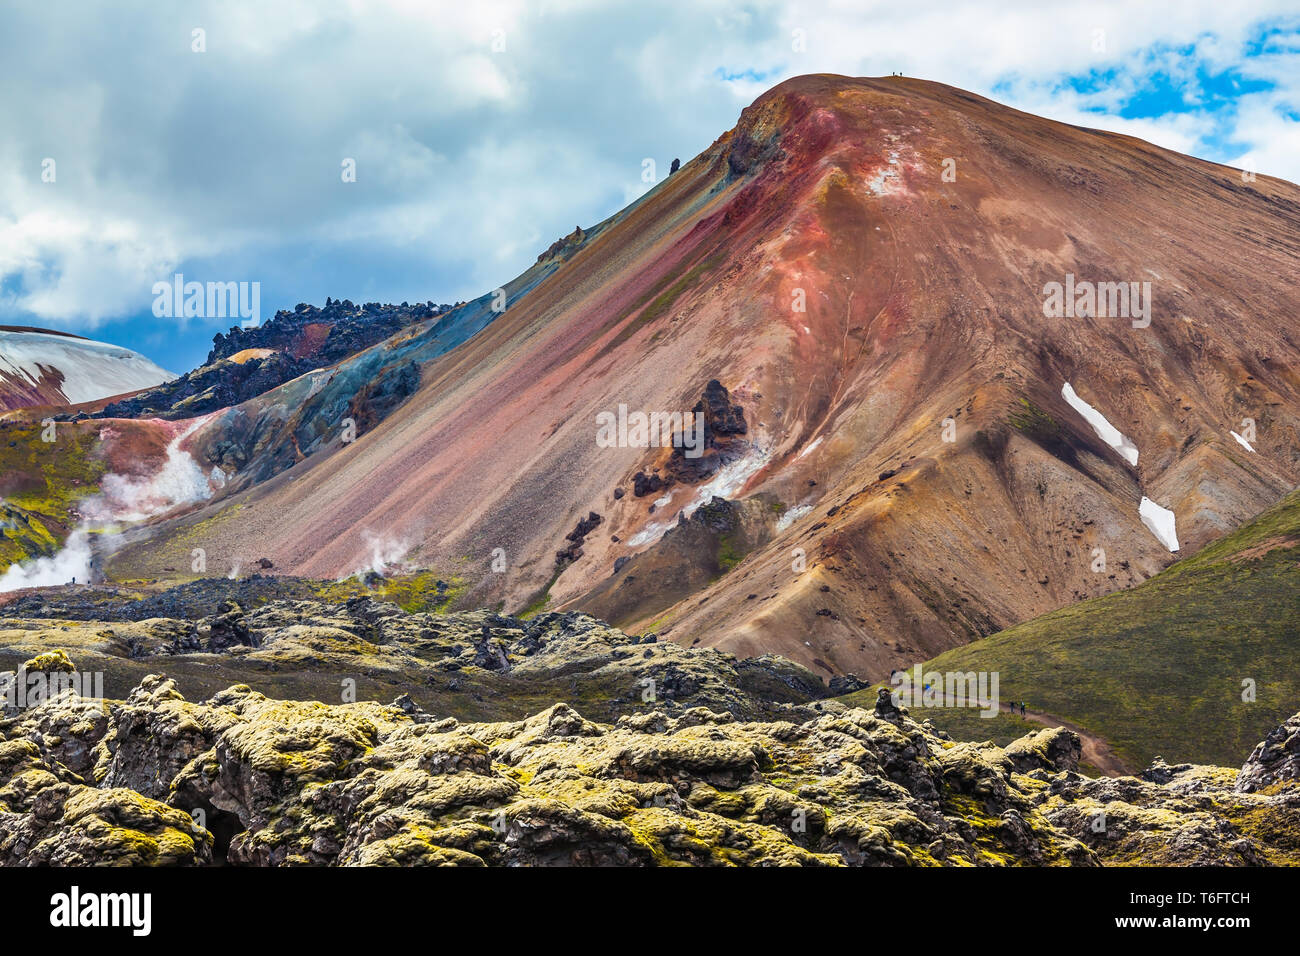 Multi-color rhyolitic mountains Stock Photo